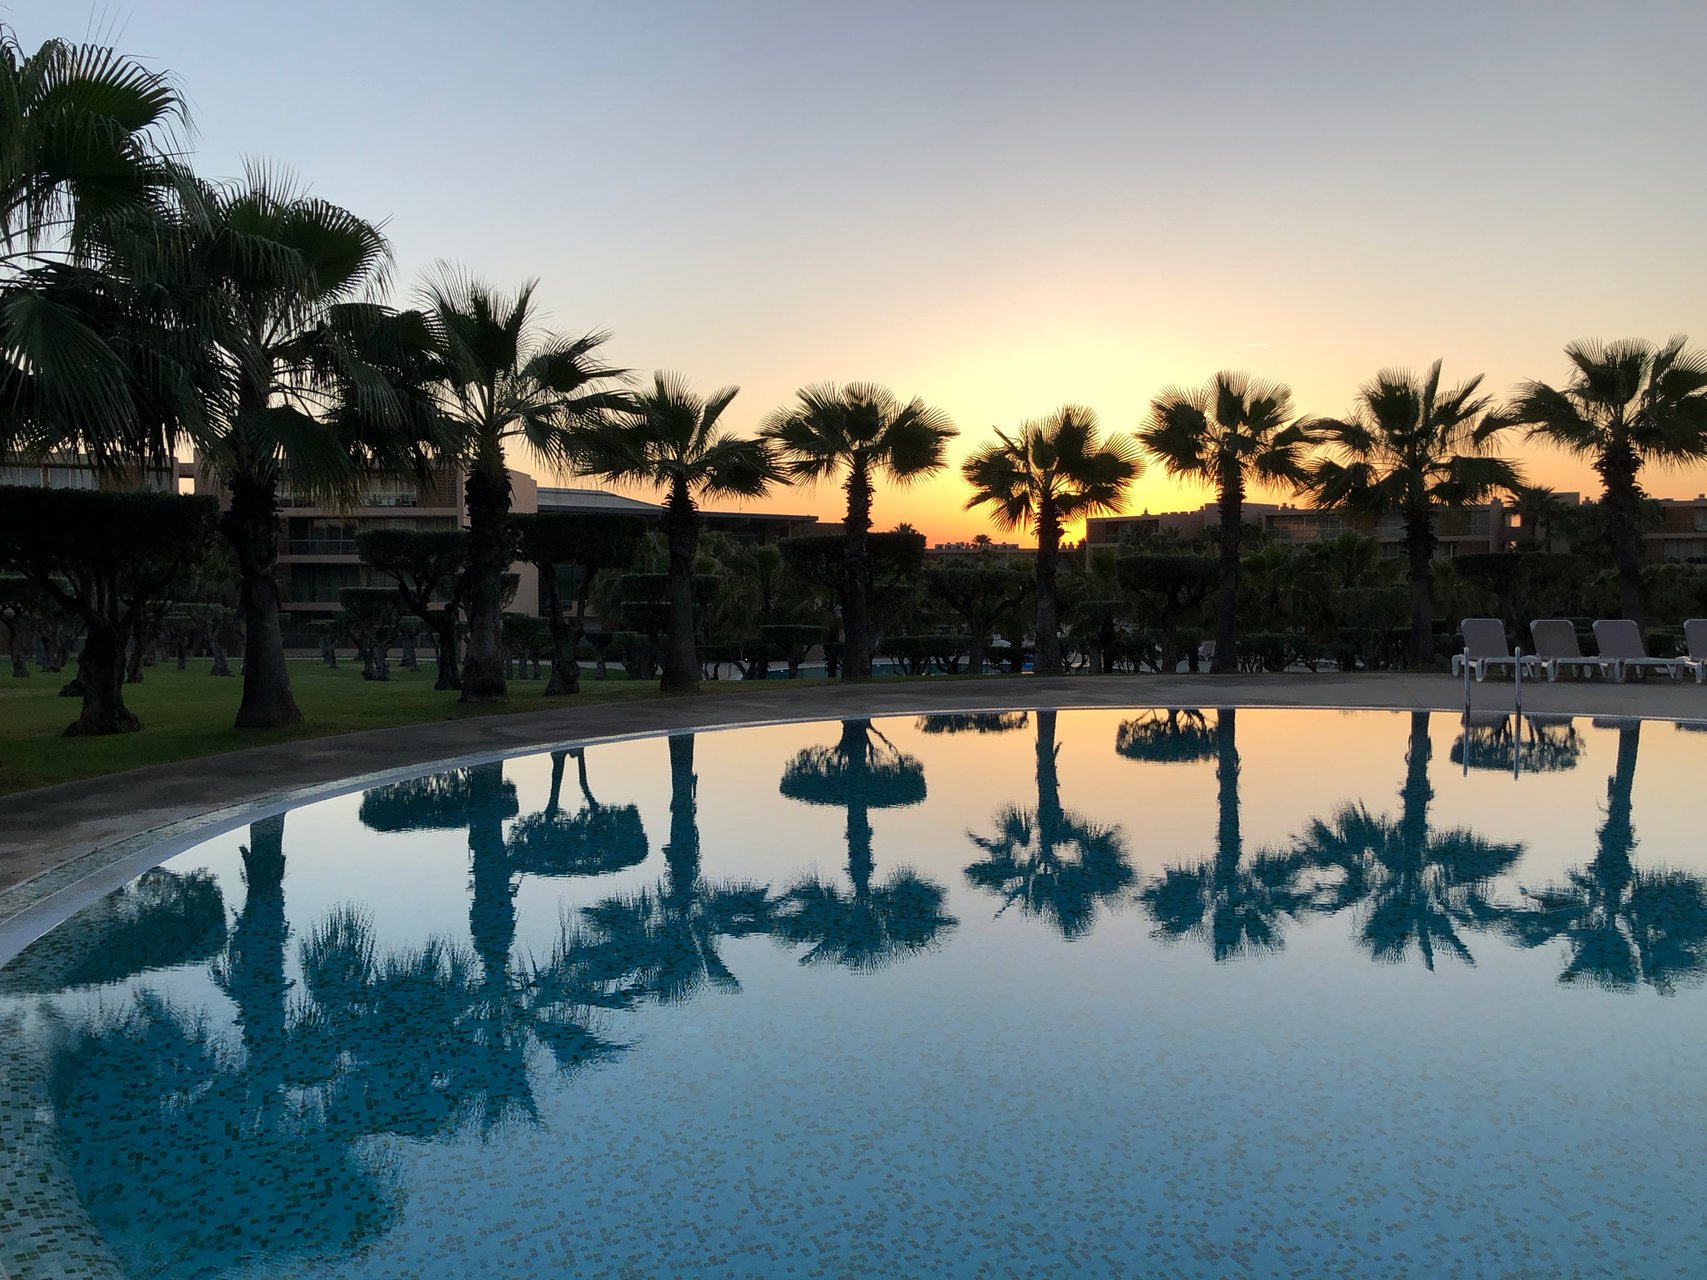 Luxury T3 Apartment view of the sunset in the pool, at Salgados Vila das Lagoas, with palm tree reflections, Albufeira, Portugal.